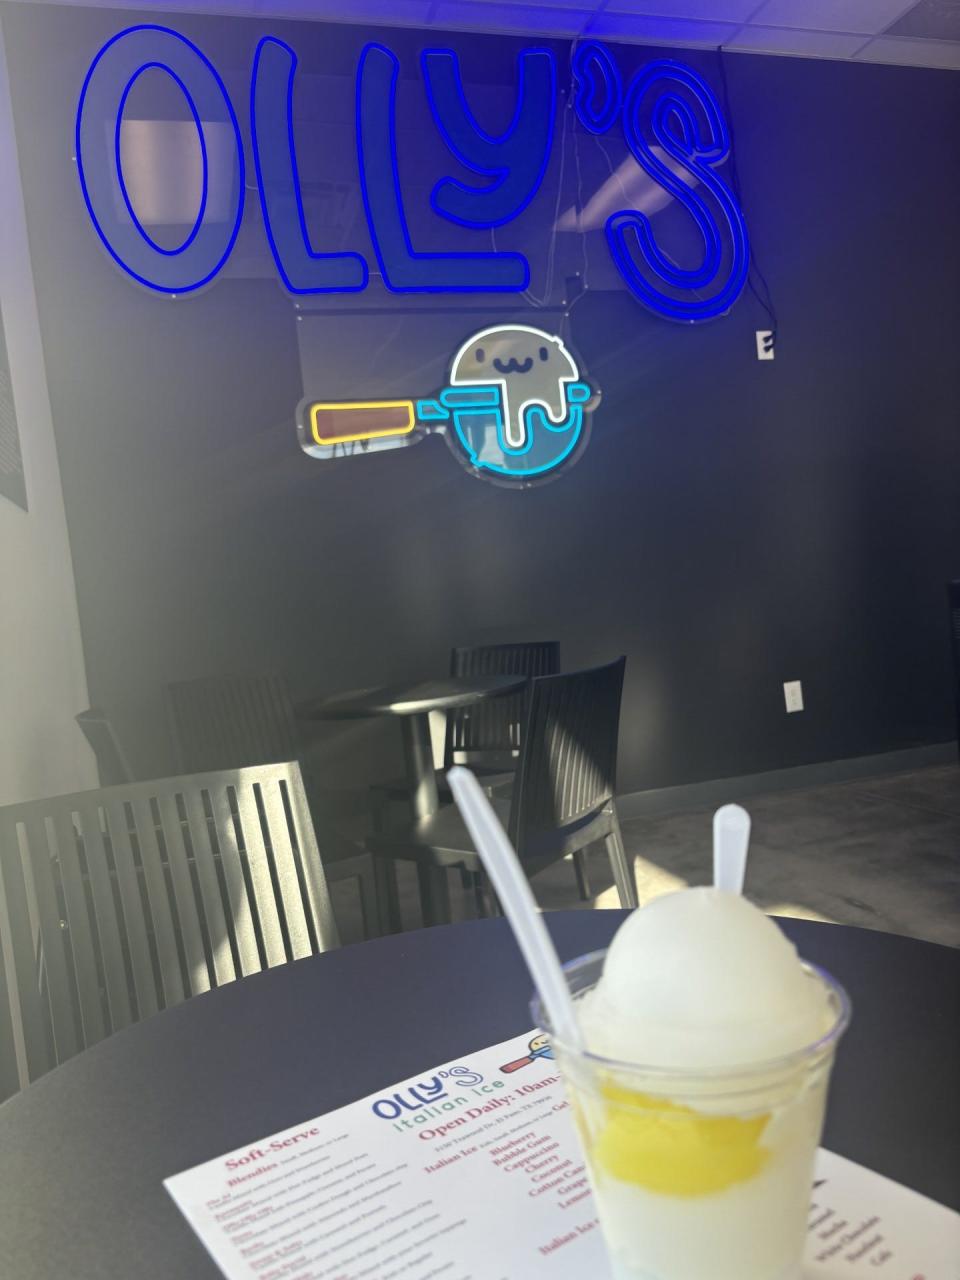 Olly's Italian Ice offers a variety of ice flavors that can be mixed with soft serve ice cream like vanilla or chocolate. The shop also offers soft serve Blendies, shakes and coffees.